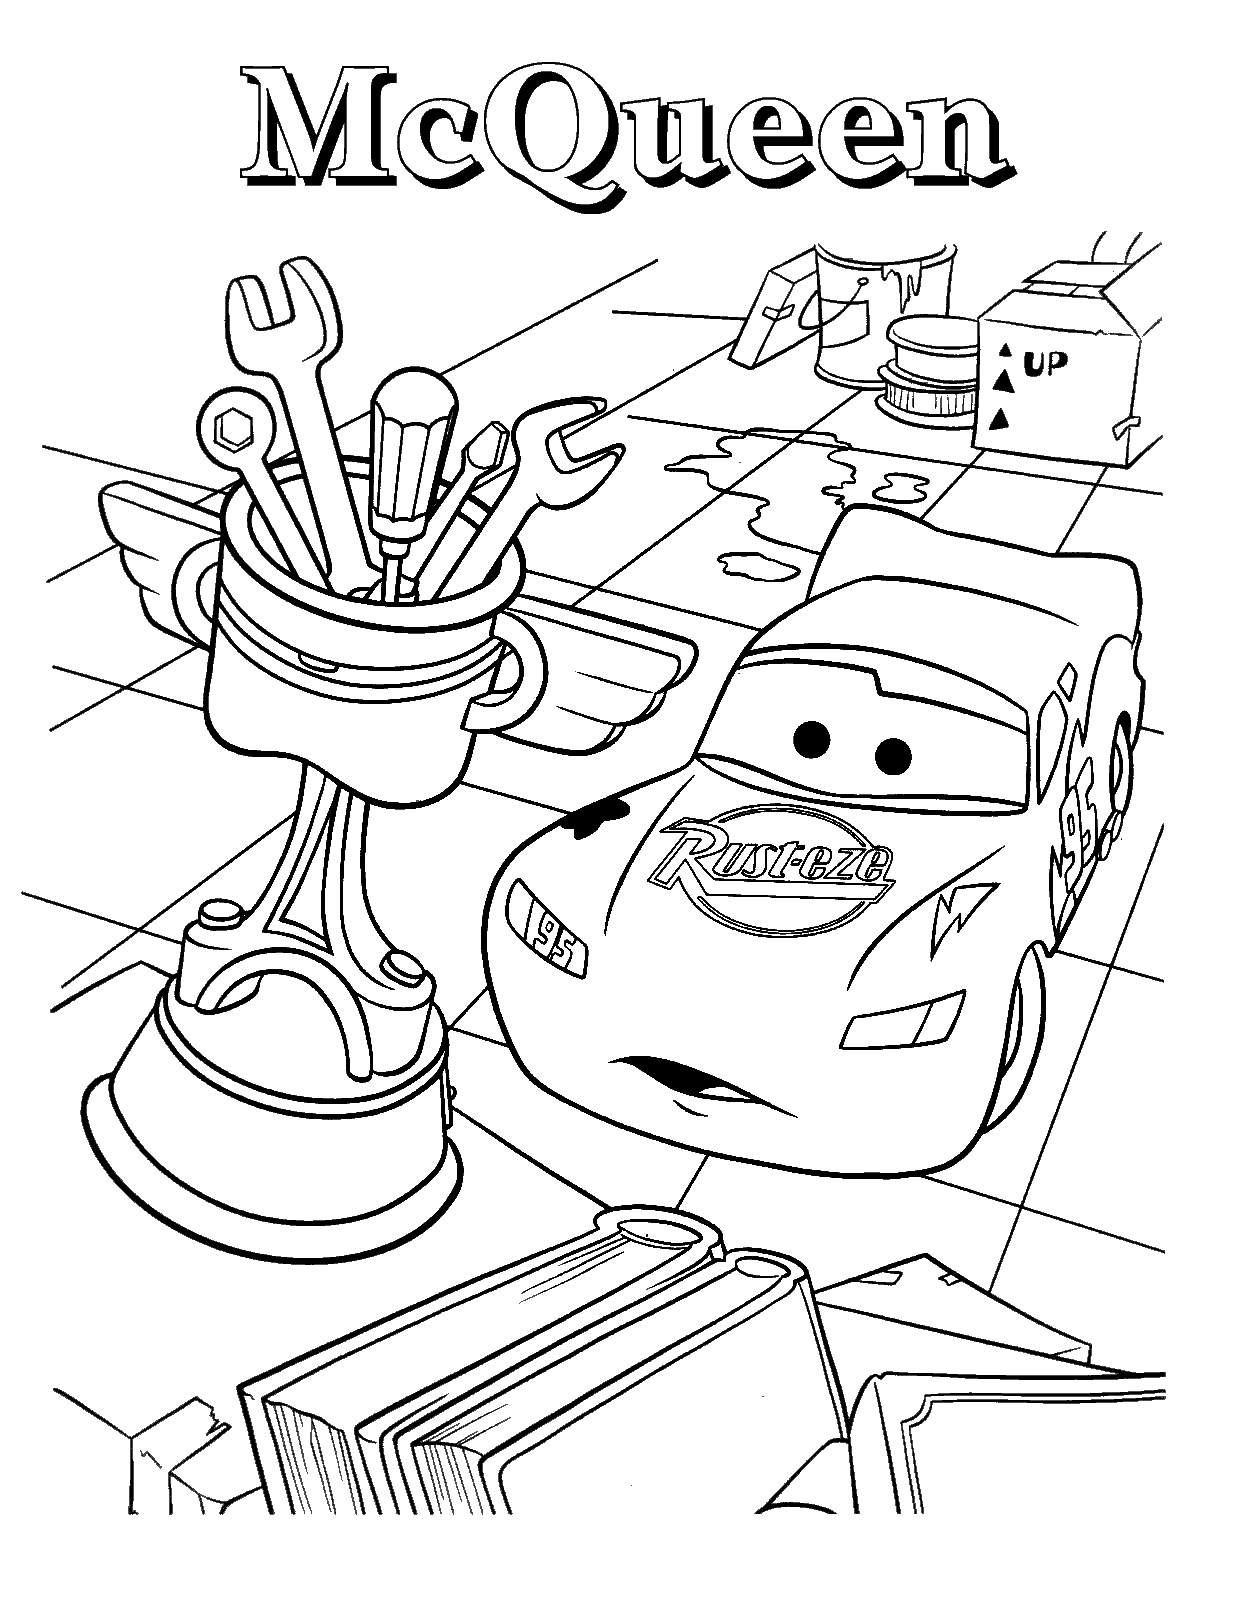 Coloring pages print free lightning mcqueen coloring pages